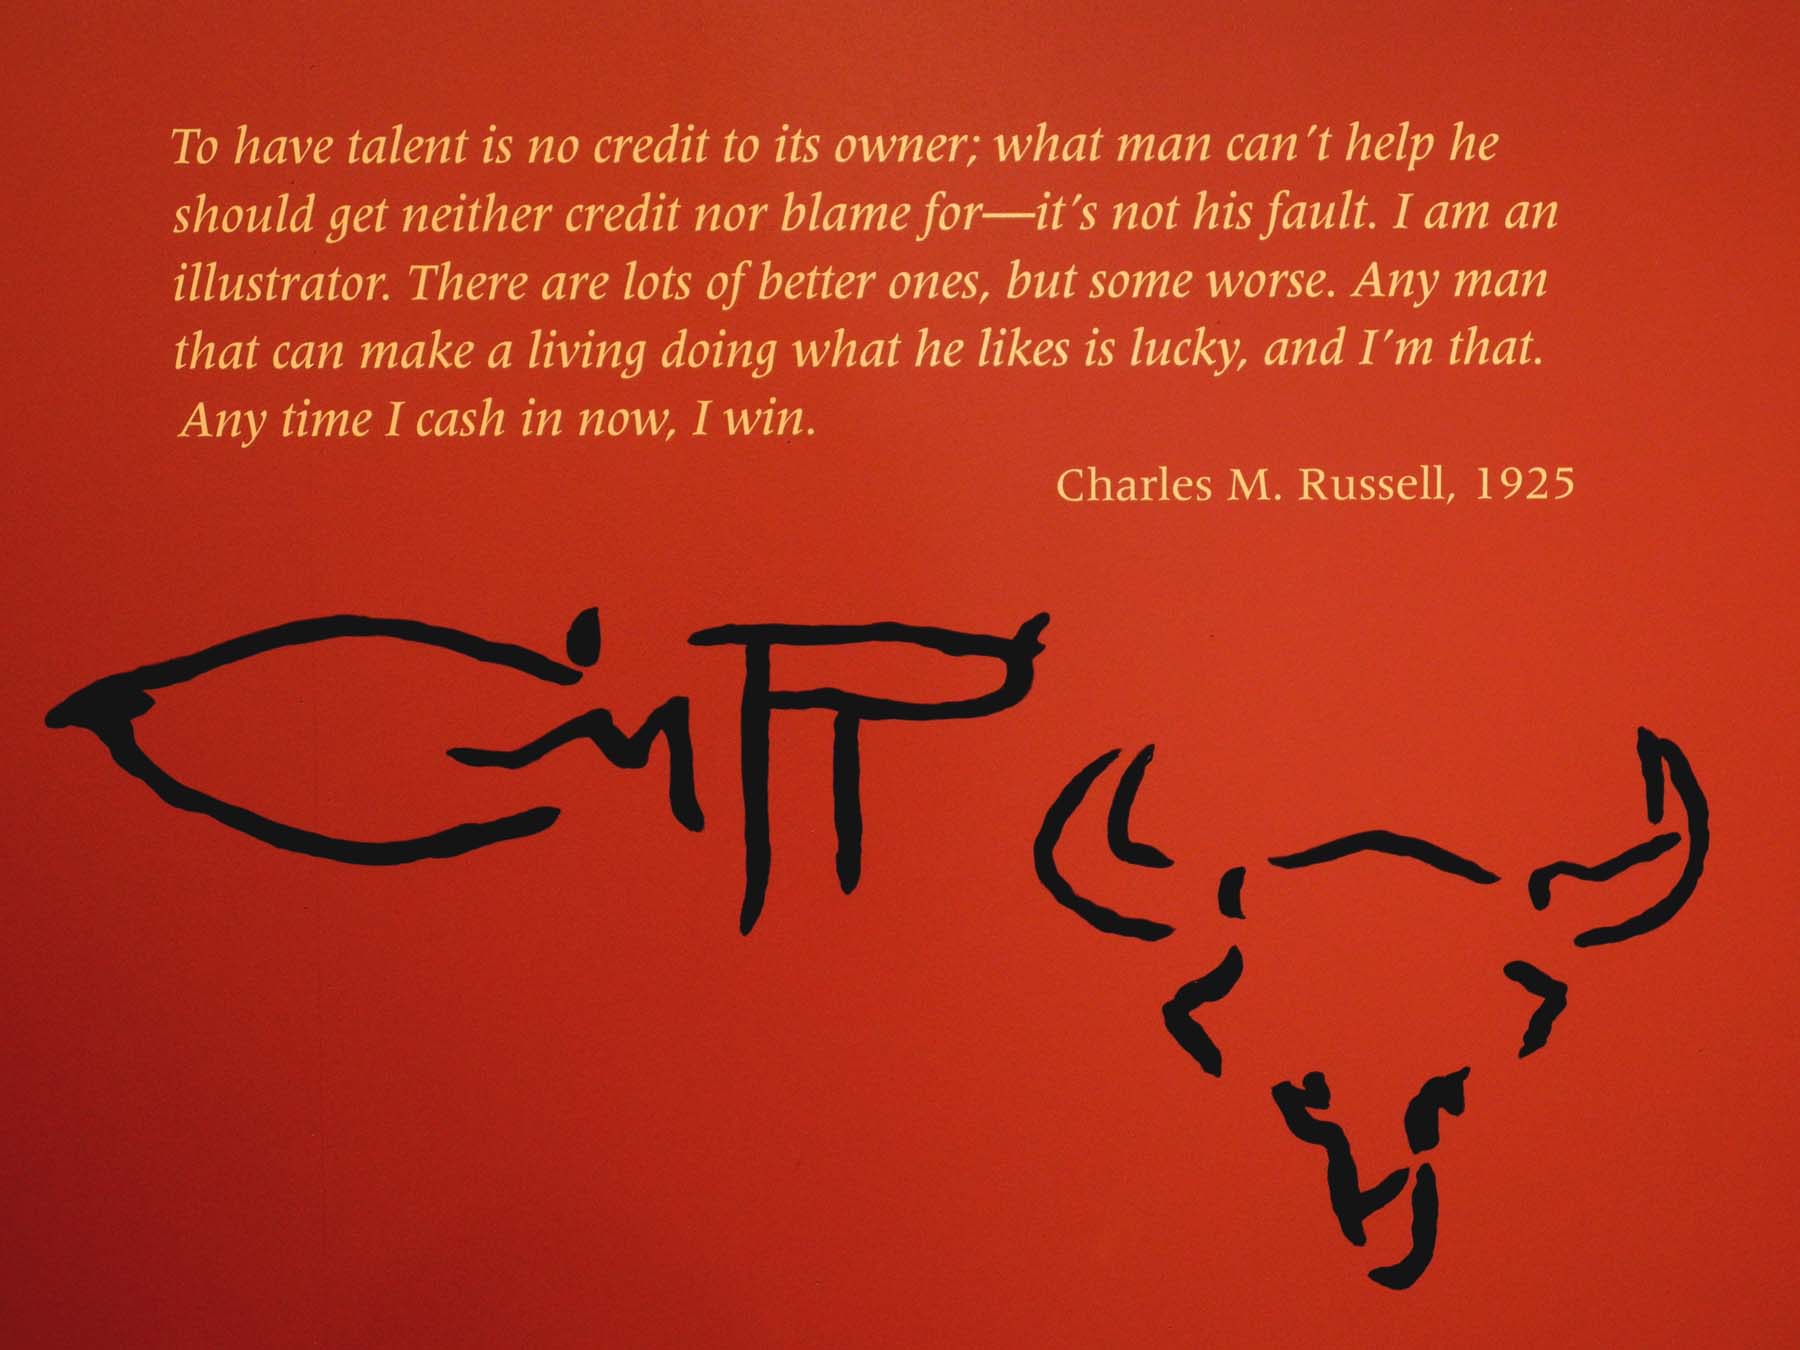 Charles Marion Russell's quote